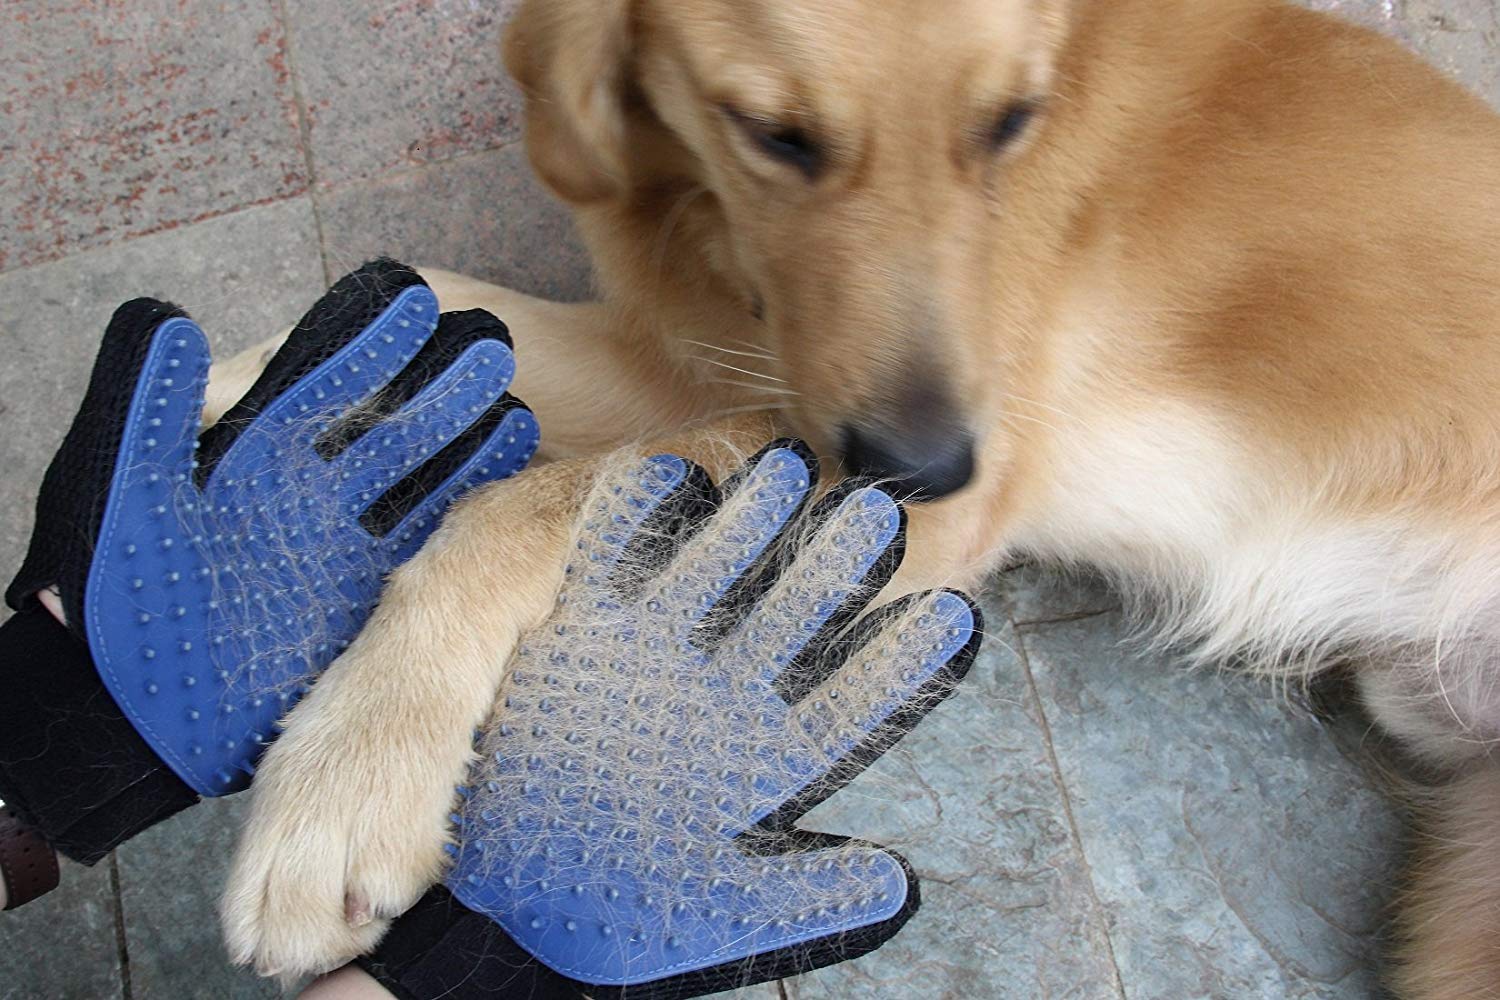 pet hair remover glove